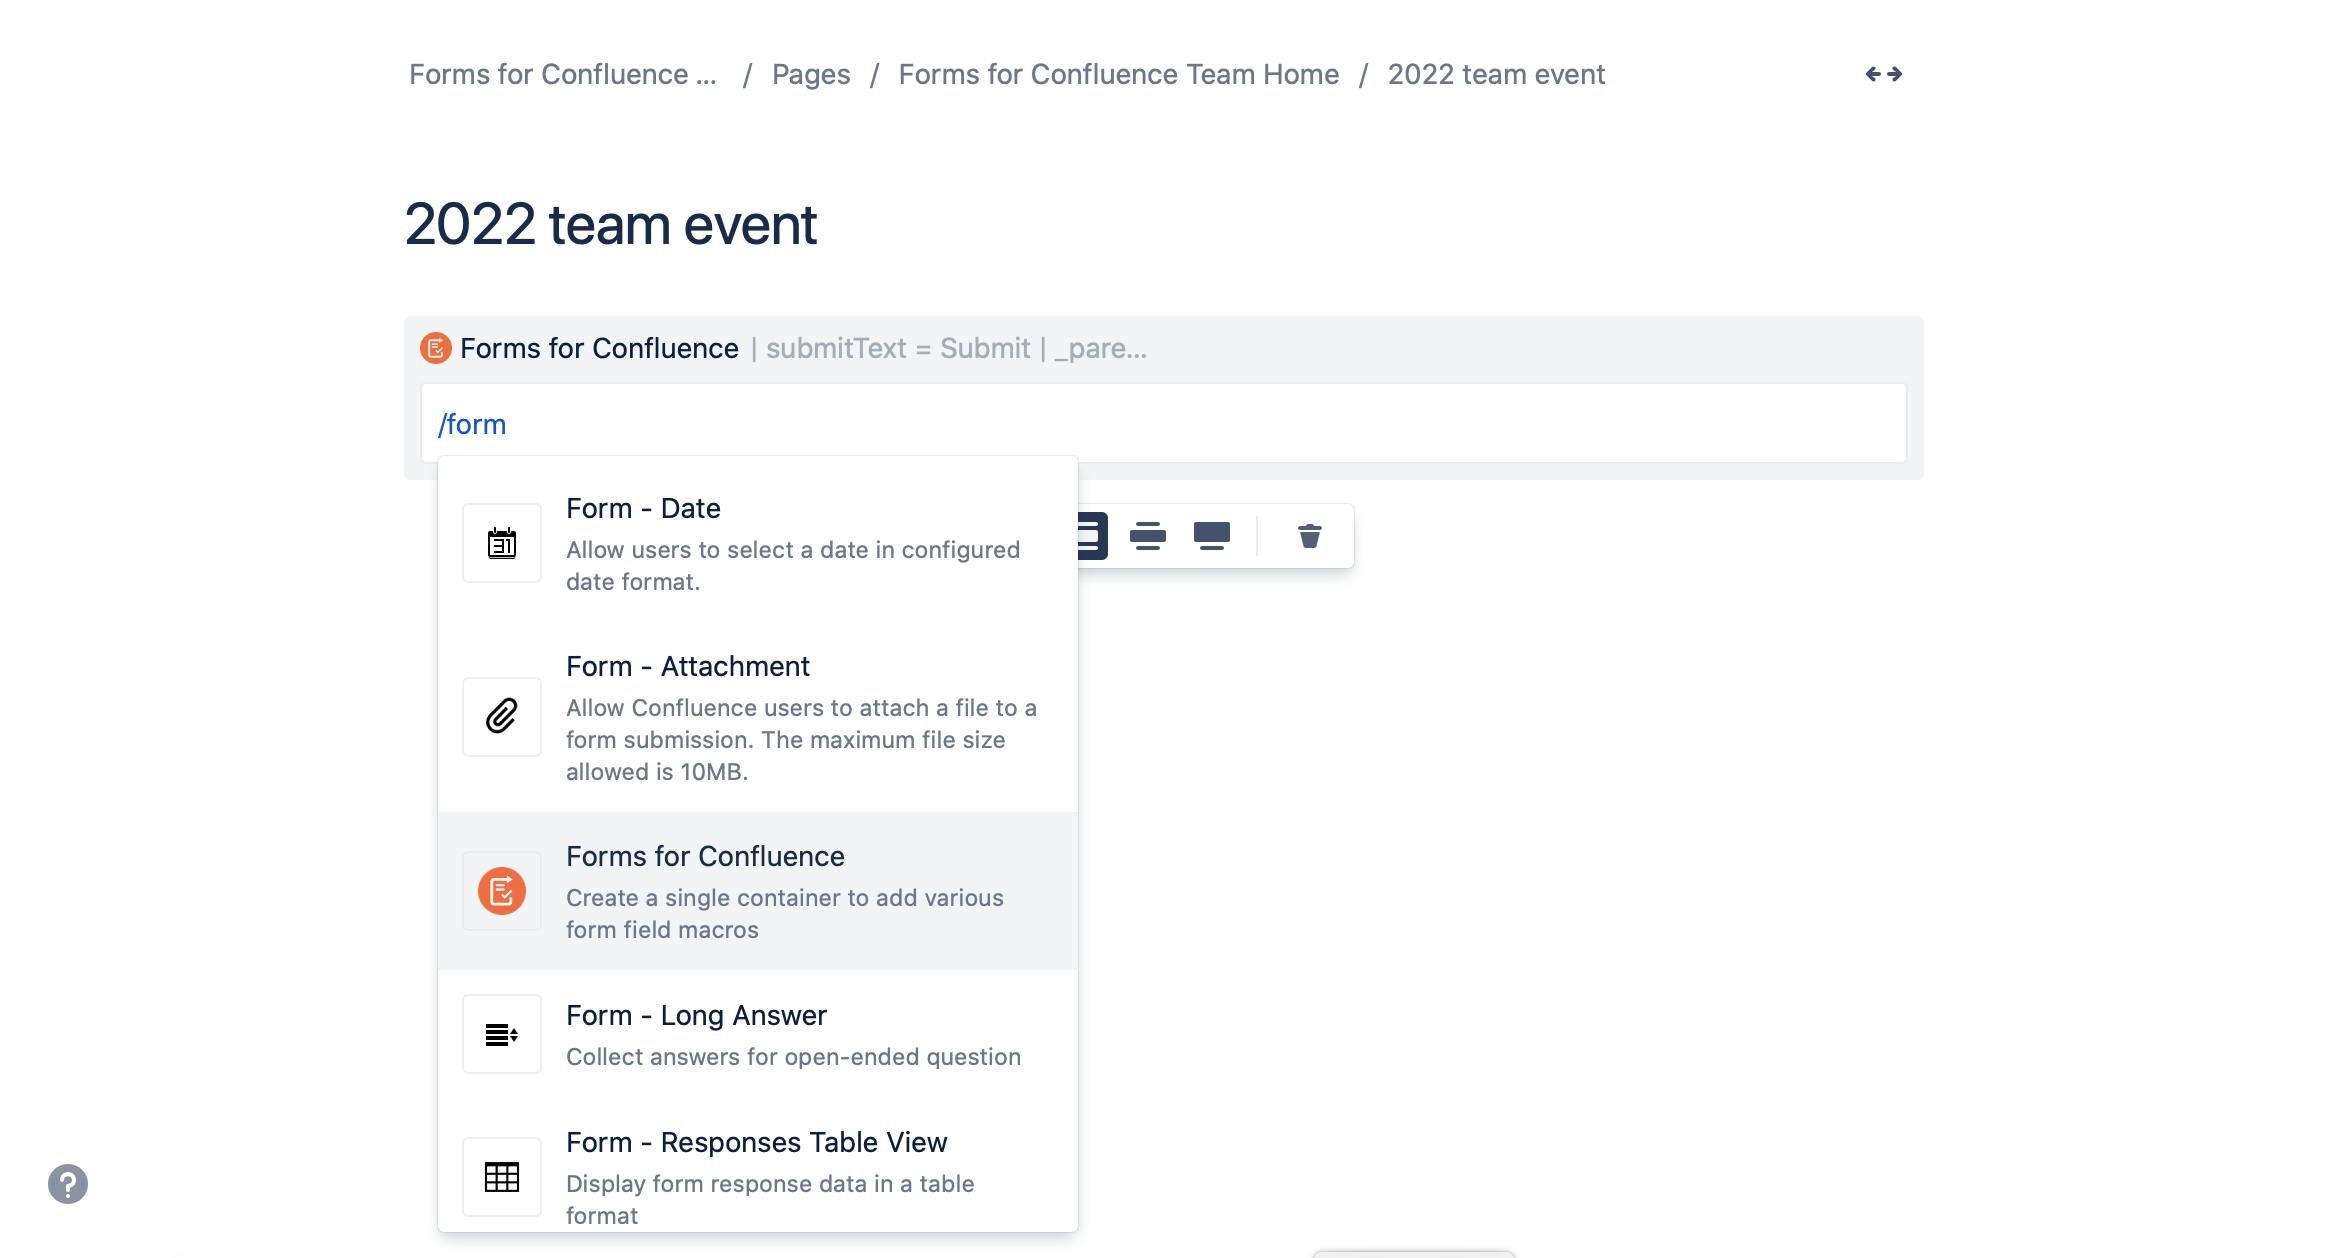 Building a form in Confluence